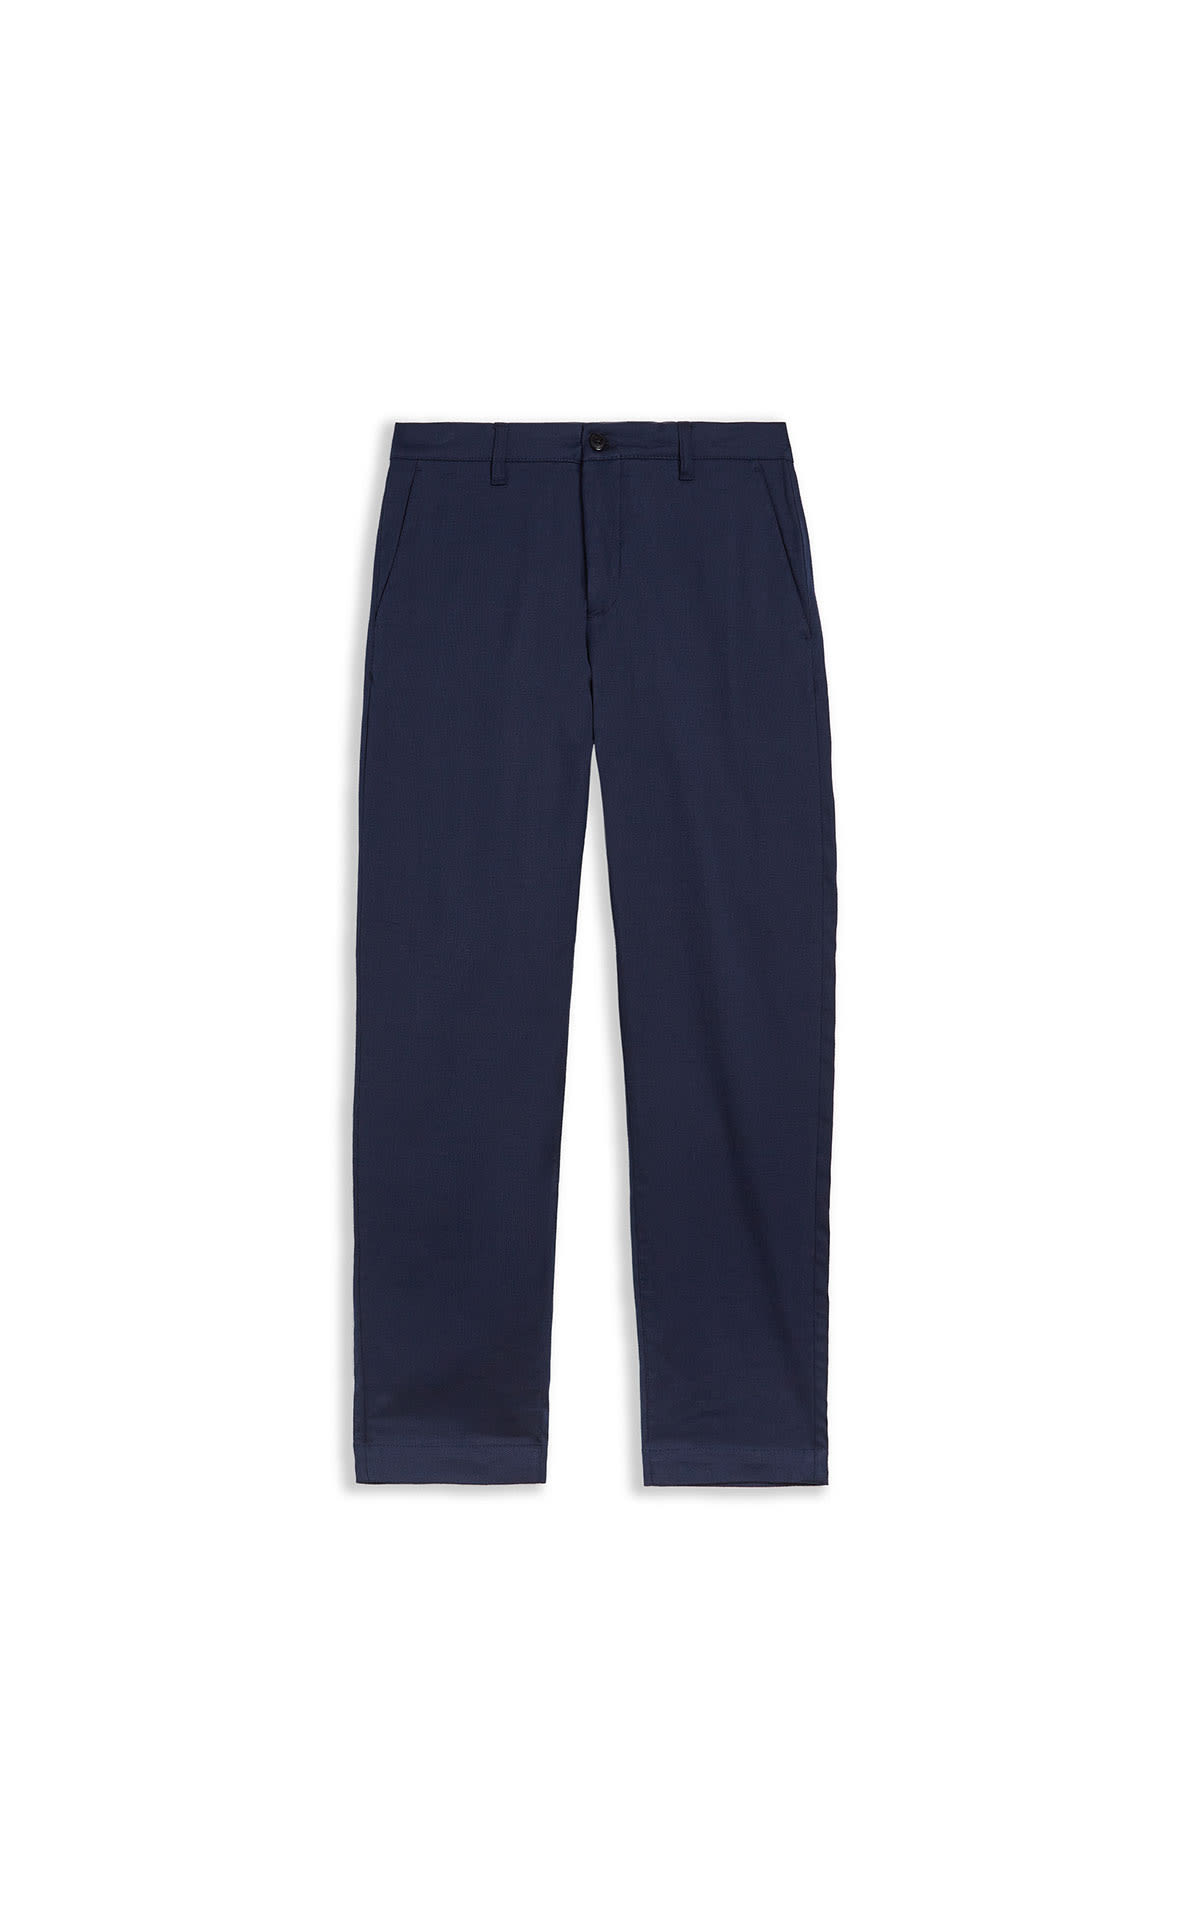 Ted Baker Regular fit textured trousers from Bicester Village